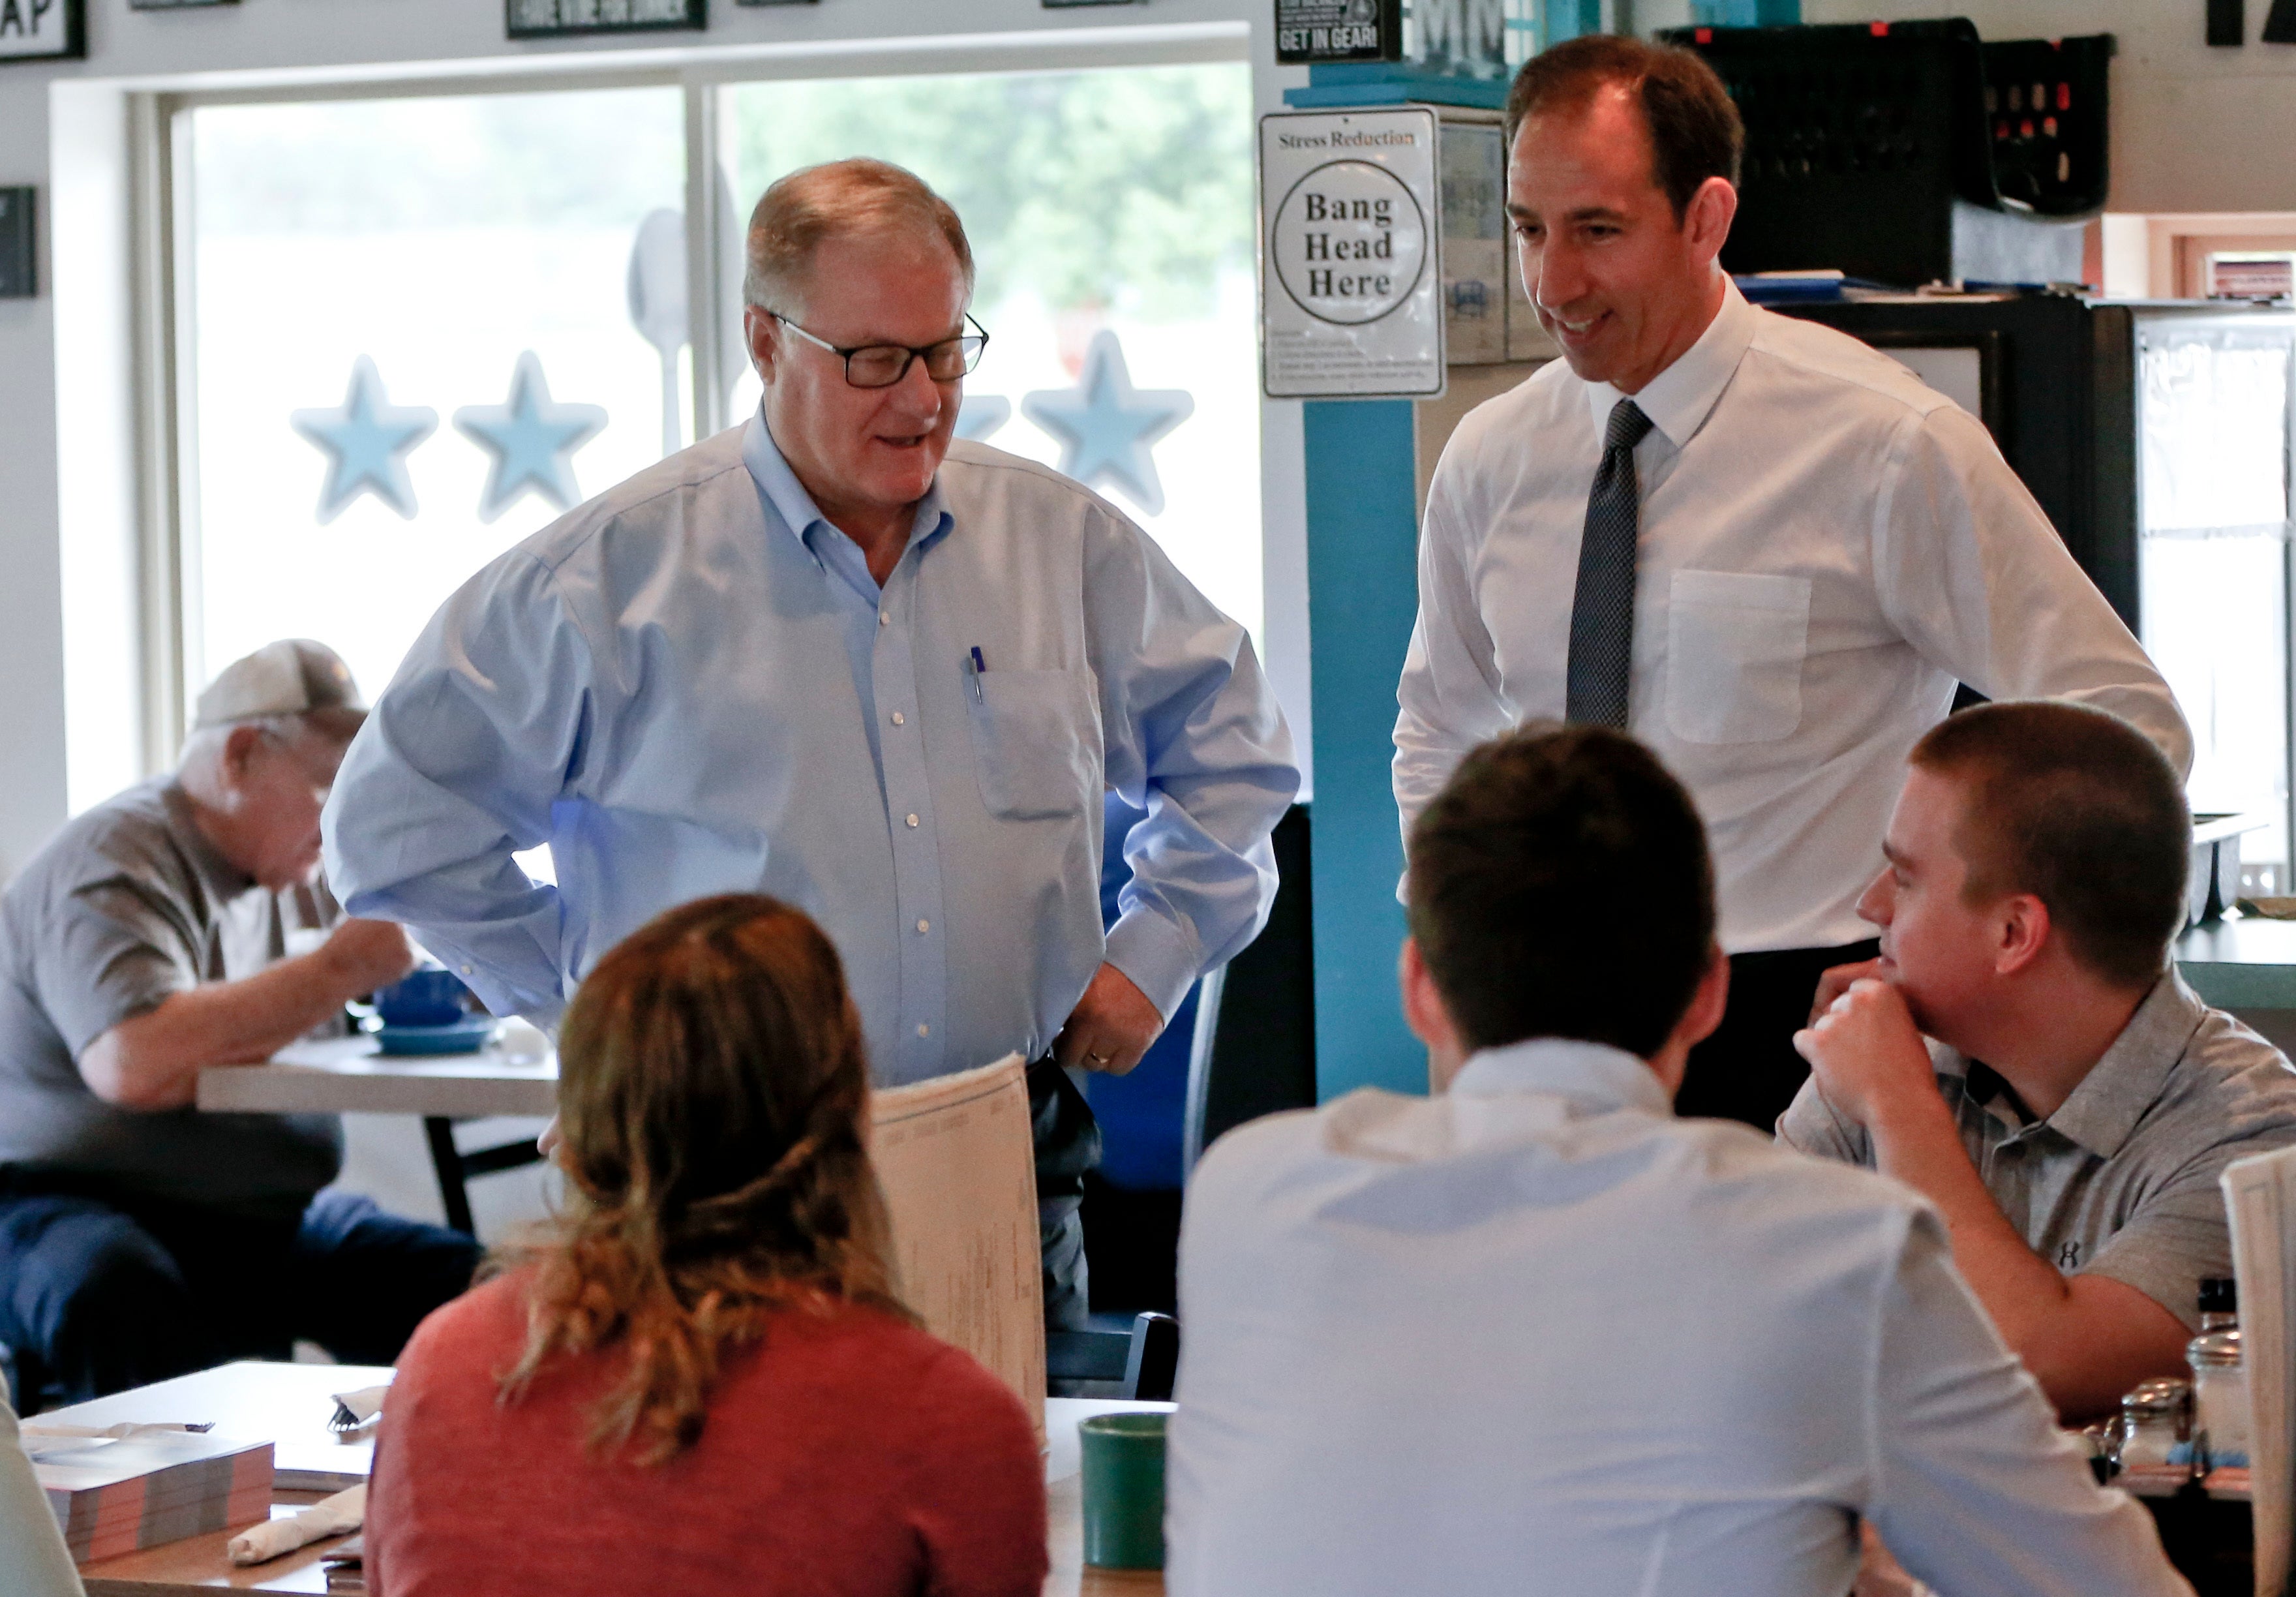 Scott Wagner and Jeff Bartos campaign at a diner in 2018